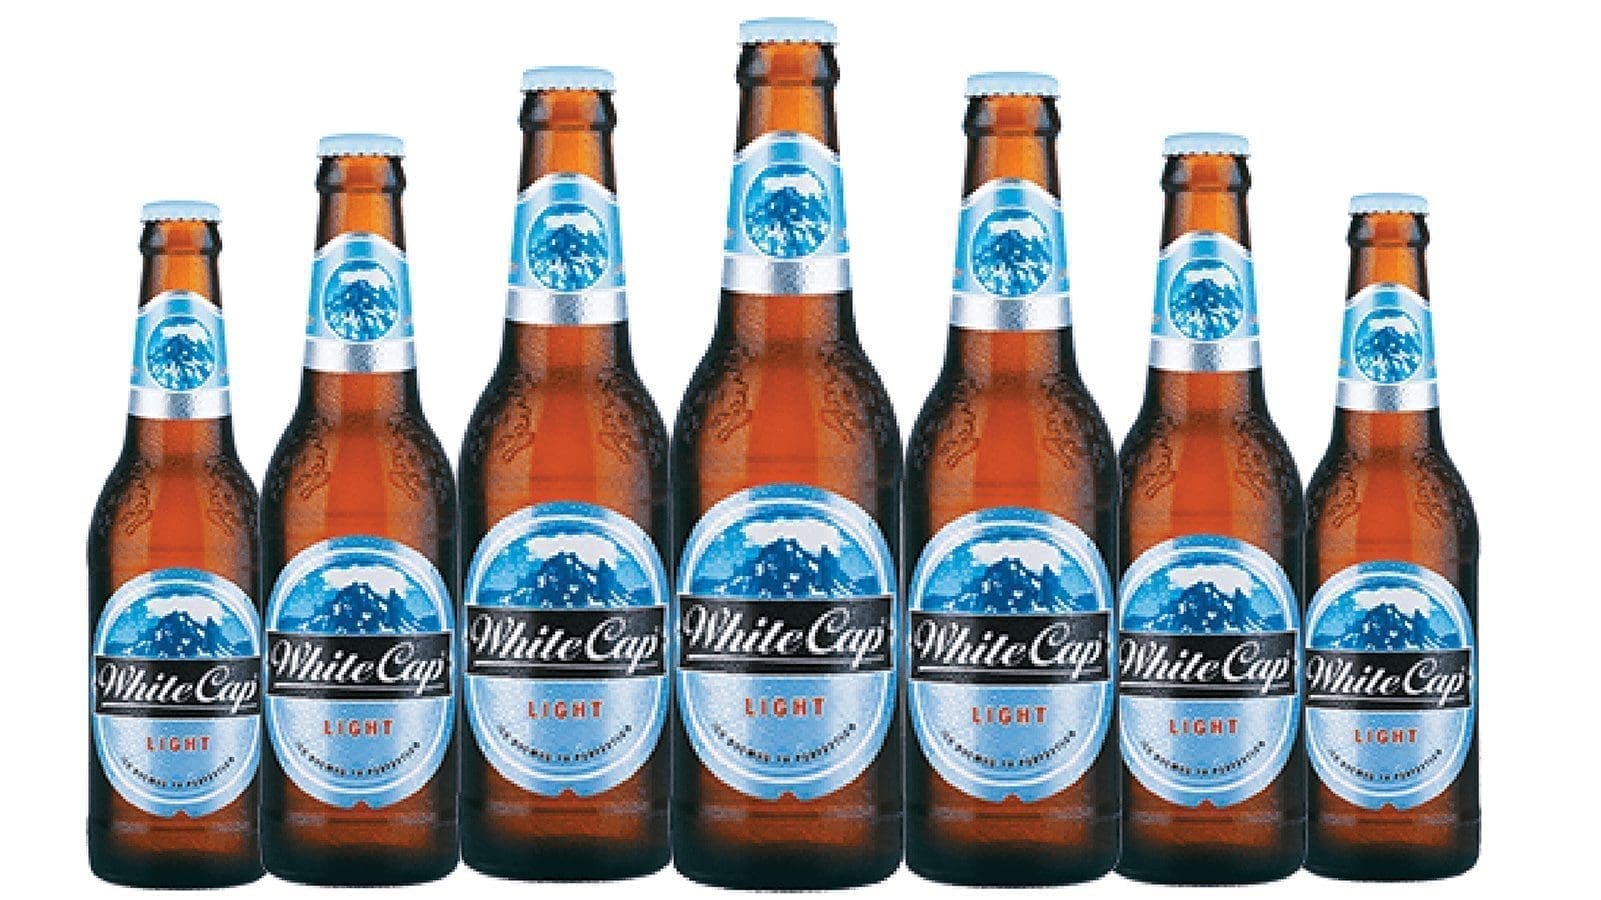 Kenya Breweries Limited entices moderate drinkers with low alcohol version of White Cap Lager